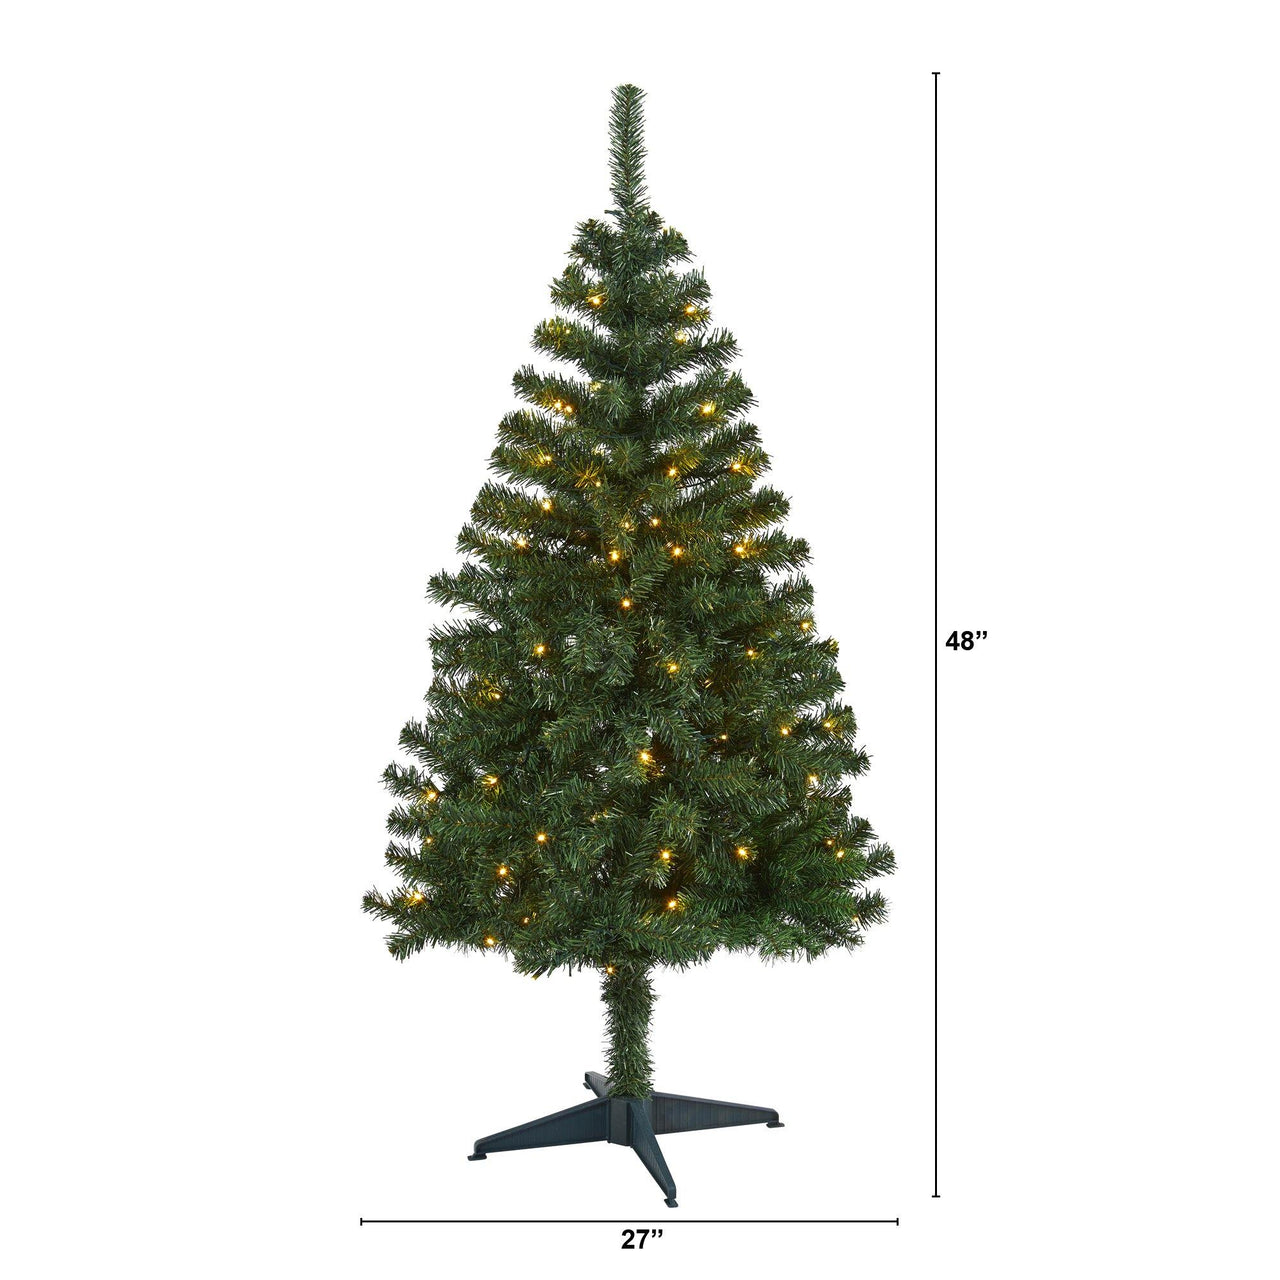 4' Northern Tip Pine Artificial Christmas Tree with 100 Clear LED Lights - The Fox Decor